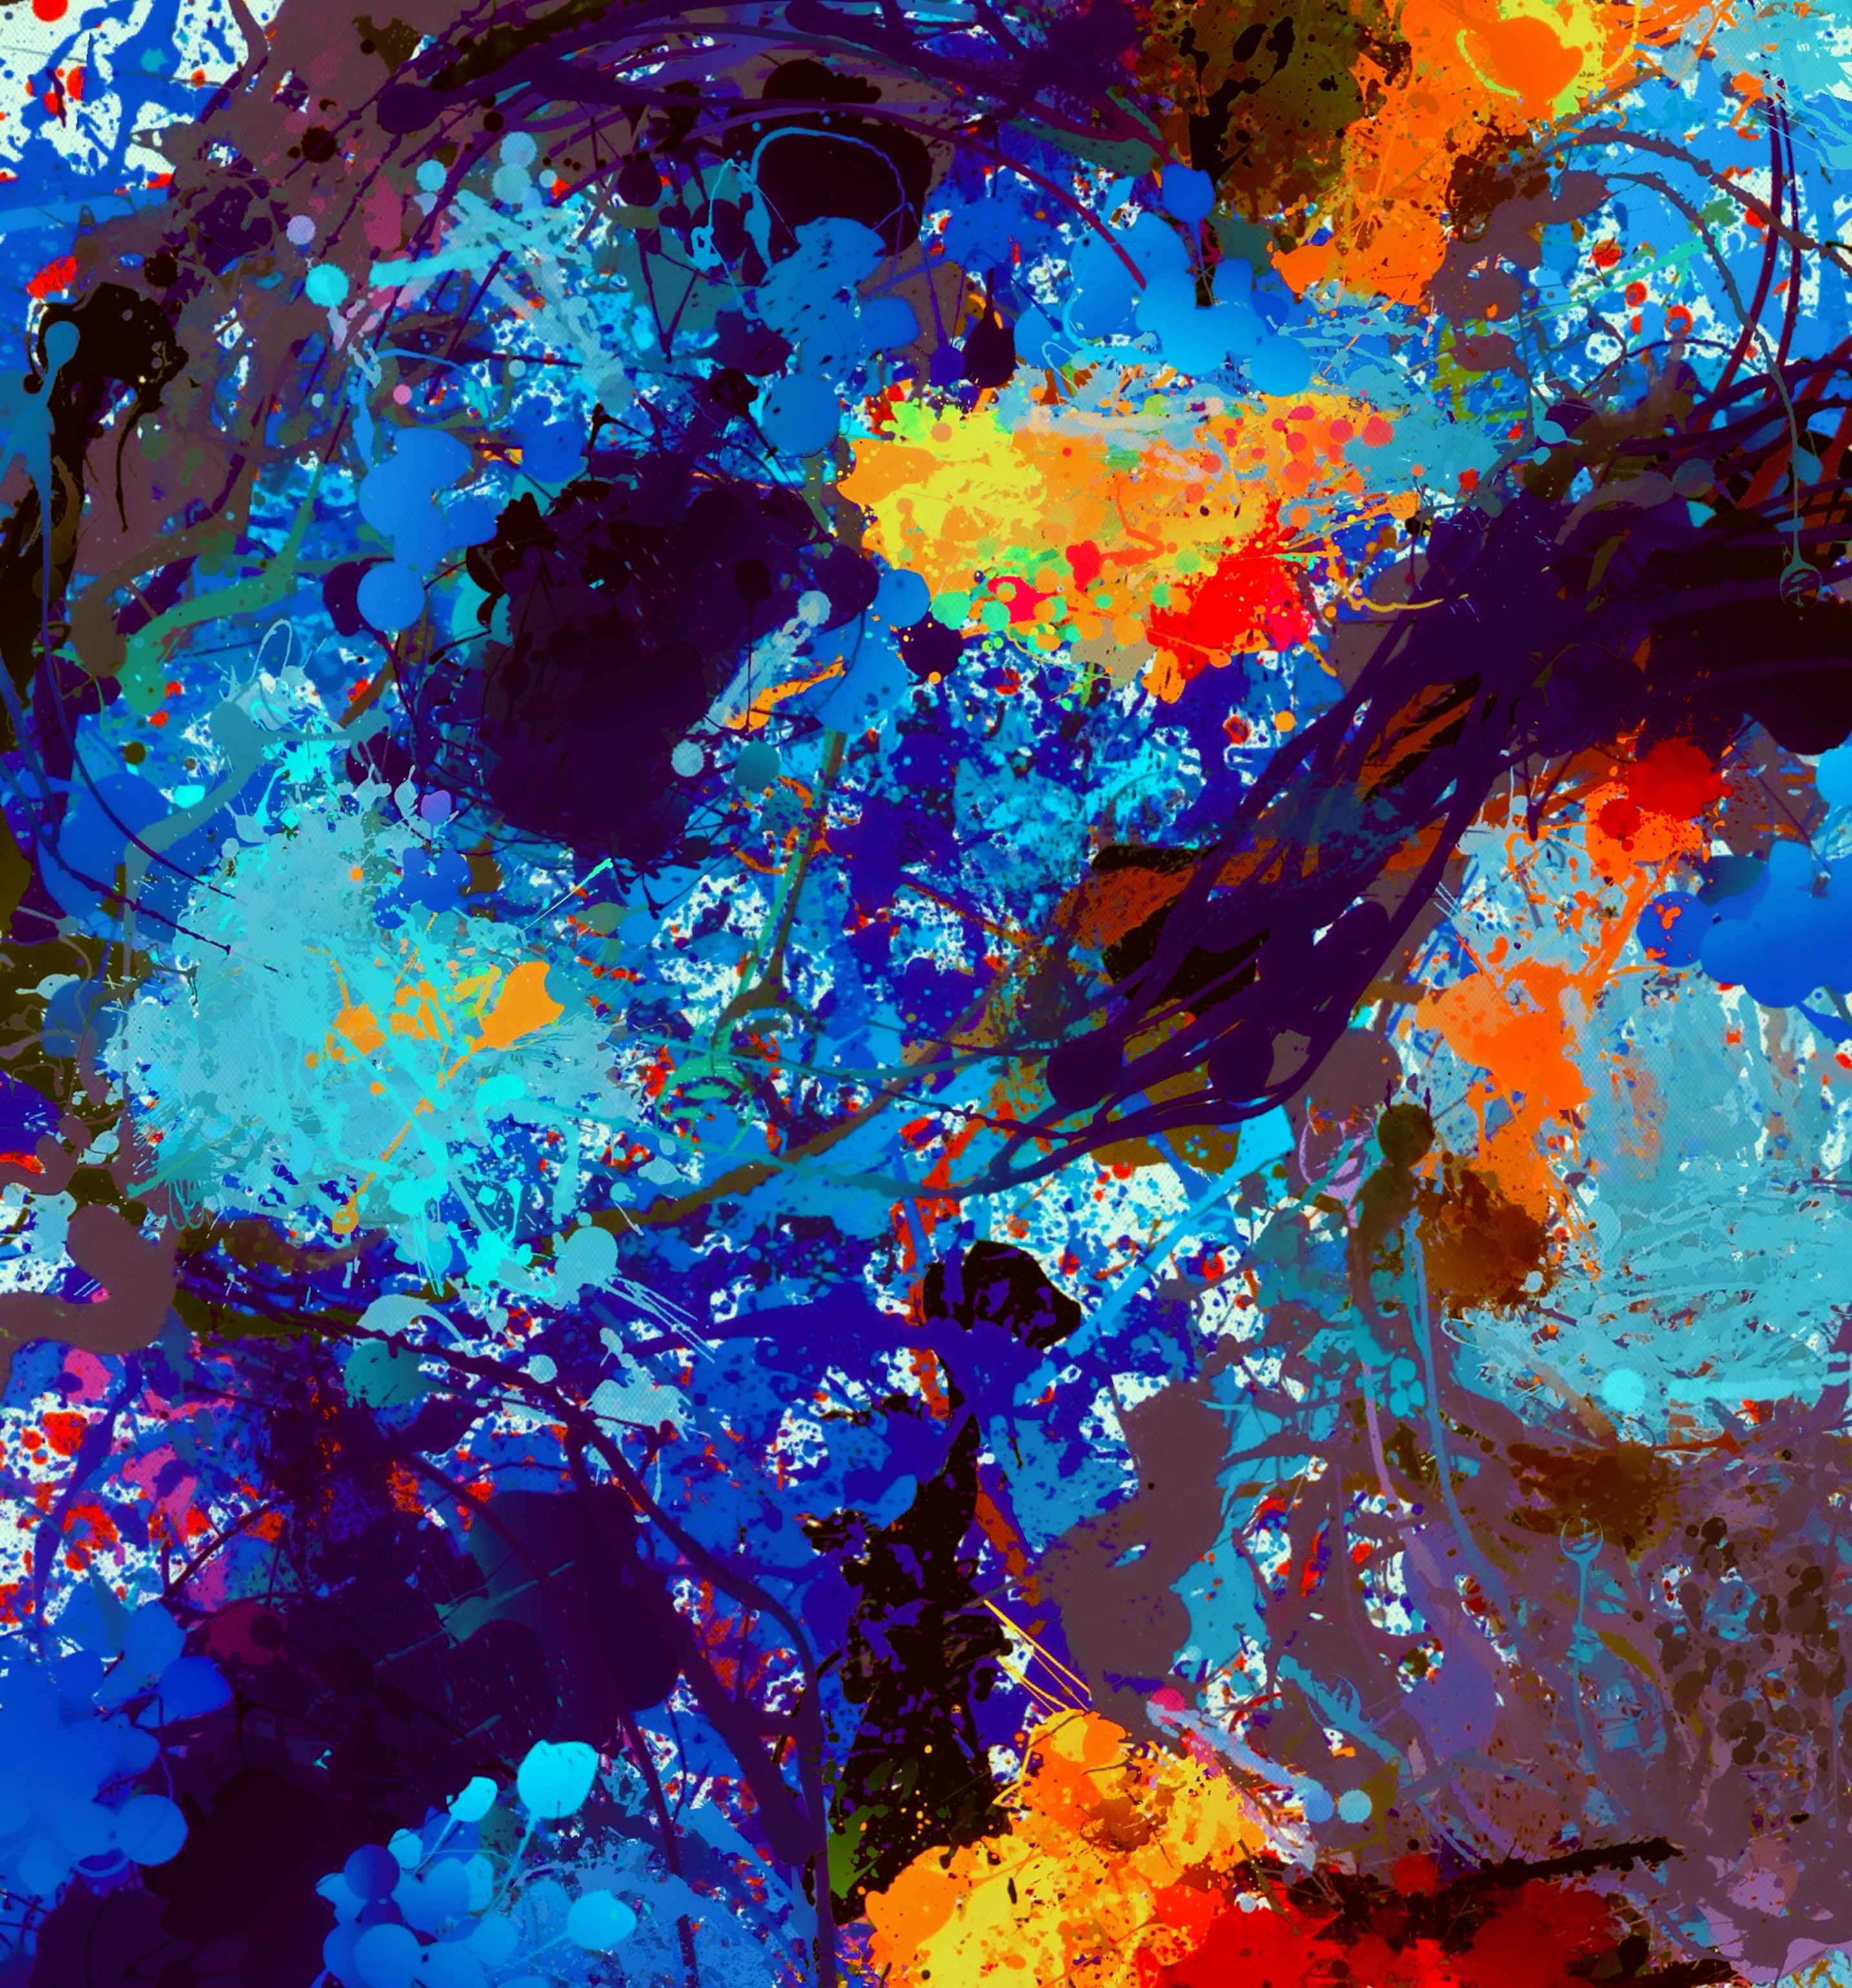 Full HD spots, multicolored, abstract, bright, motley, paint, stains, colorful, colourful